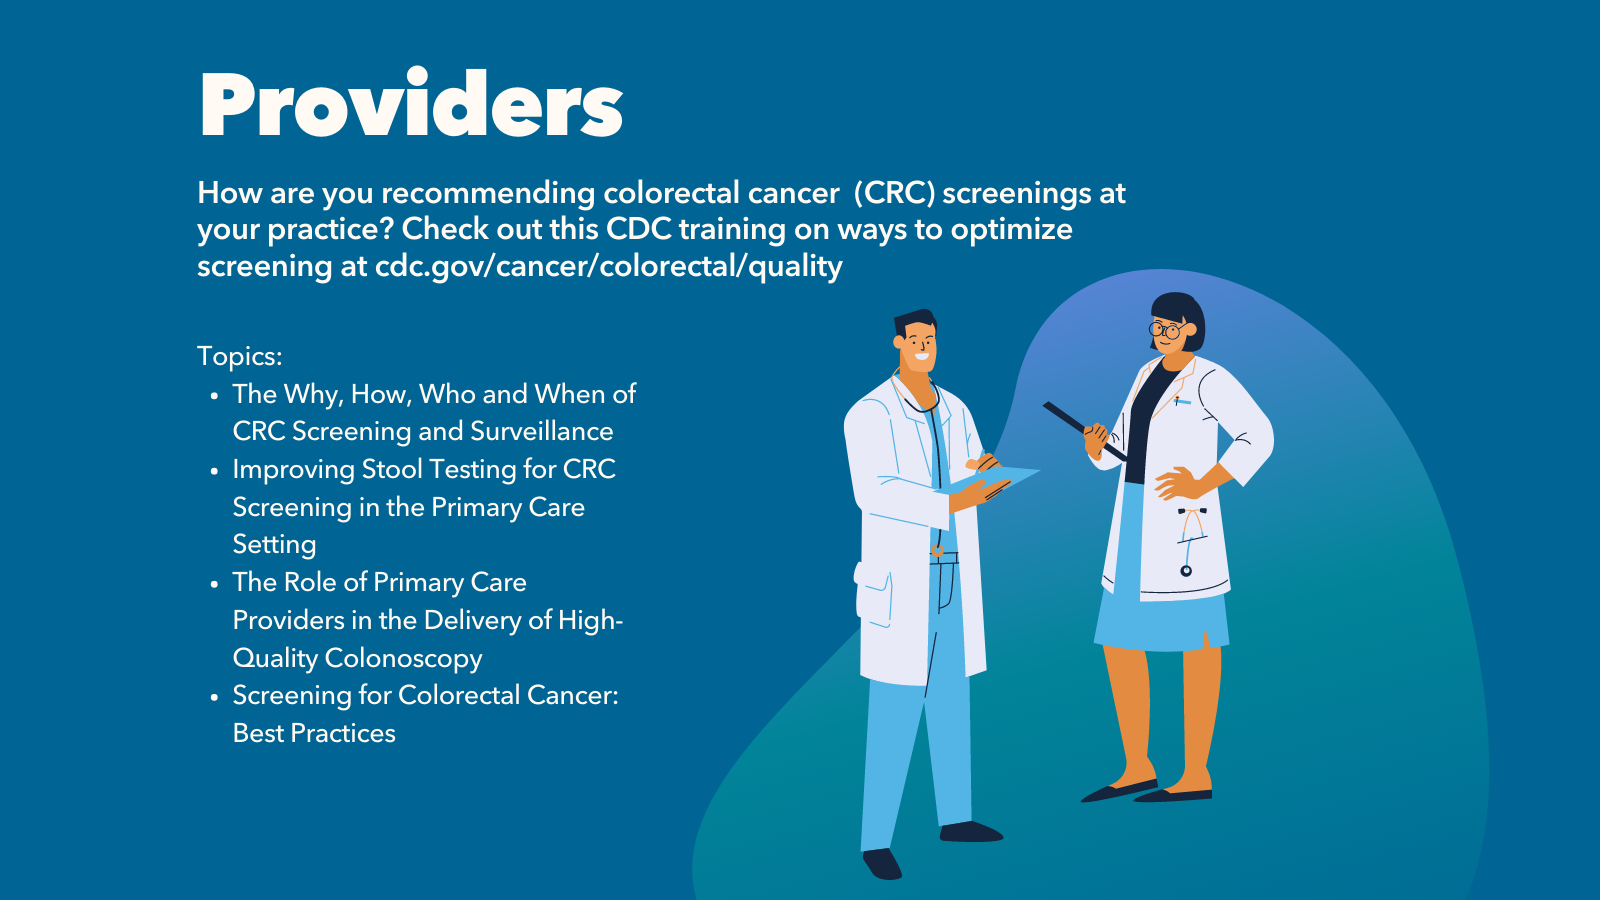 Image of two doctors with list of topics provided by a CDC training on optimizing colorectal cancer scrreening